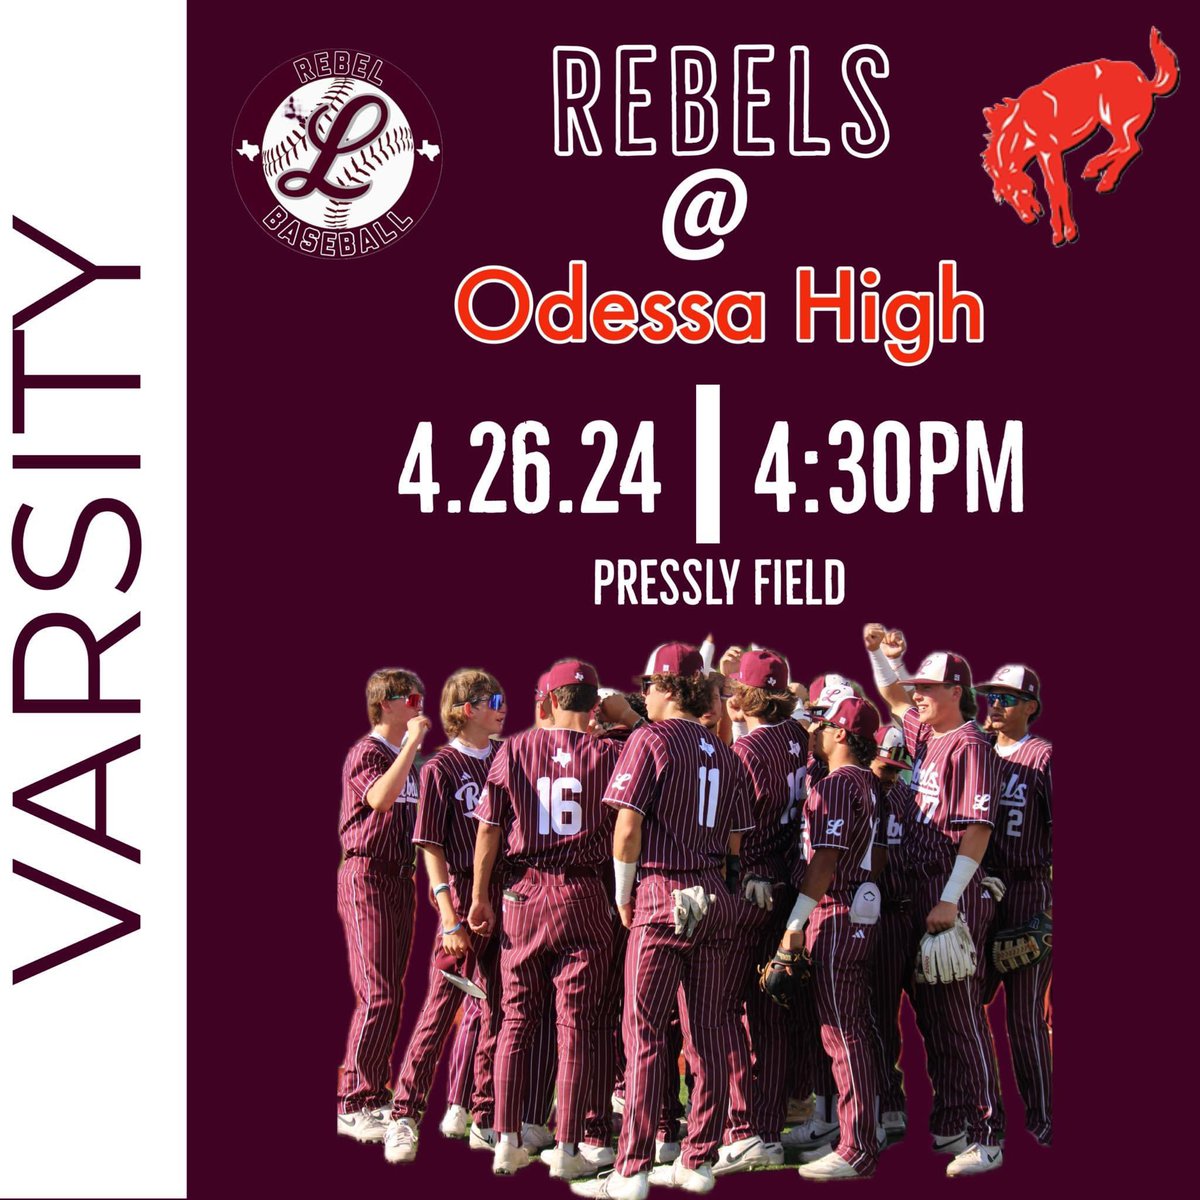 GAME DAY for Varsity Rebels as they continue their district series against OHS in Odessa! GAME 2 🆚: Odessa High Bronchos 🏟️: Pressly Field 🕟: 4:30pm GO REBELS!! #2024rebelbaseball